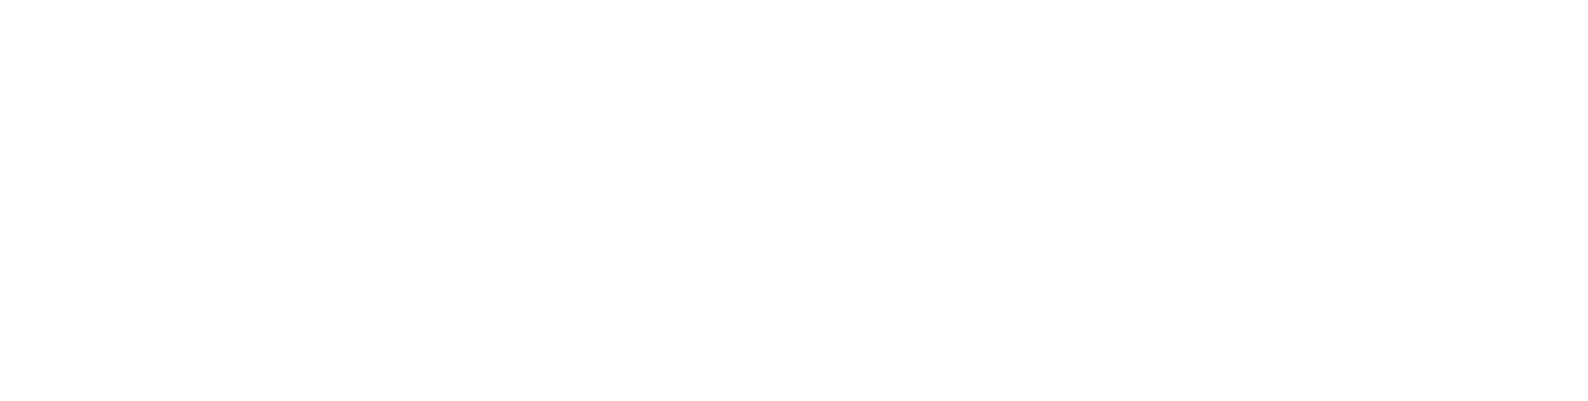 NexPoint Residential
 logo large for dark backgrounds (transparent PNG)